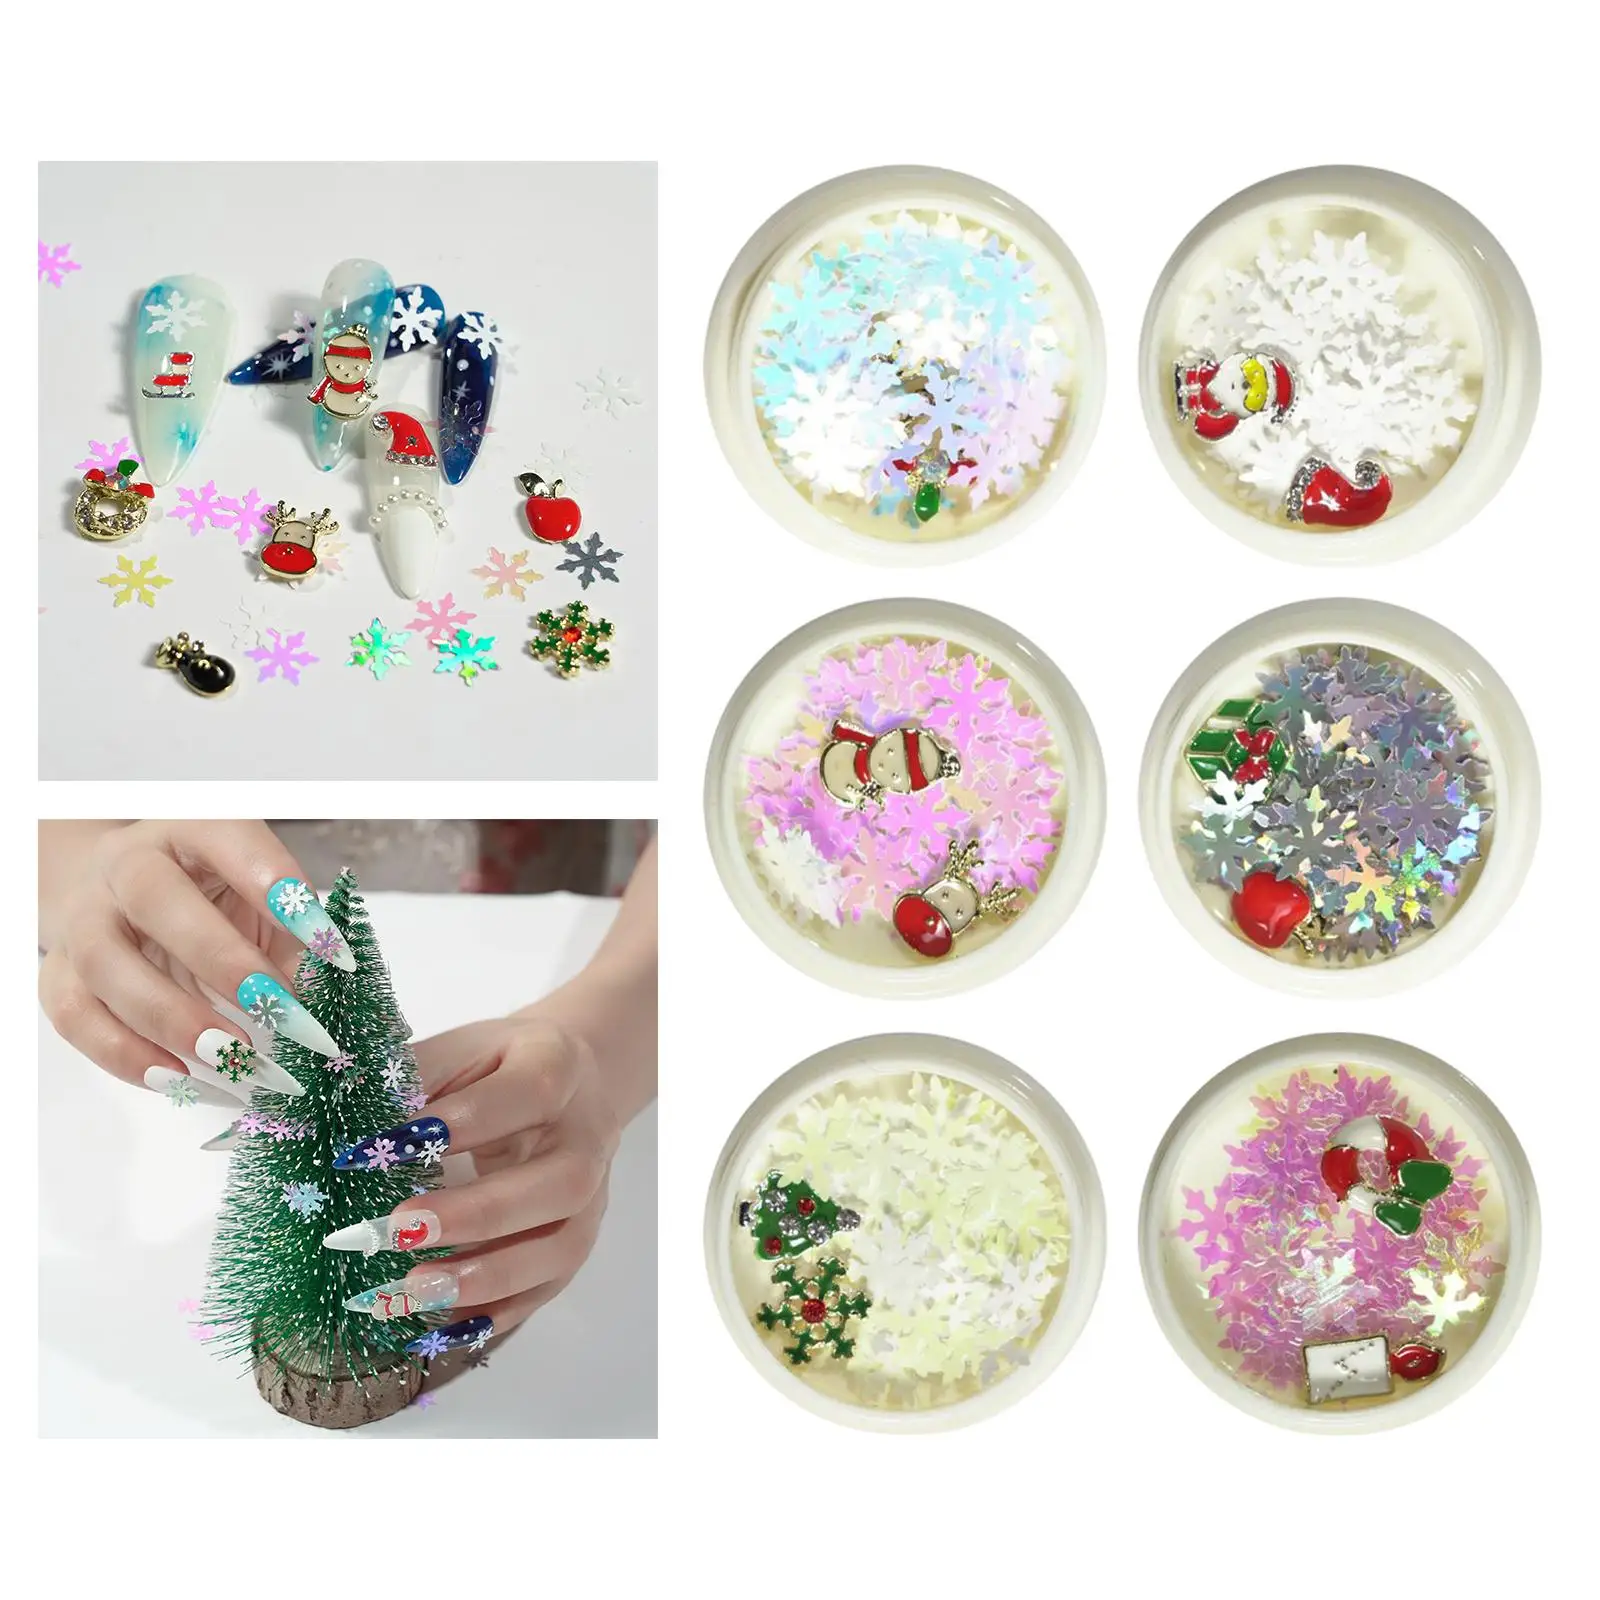 6 Colors Christmas Nail Glitter Sequins, Nail Art Design DIY Manicure Crafts Glitters Nail Art Decoration Salon Home Use